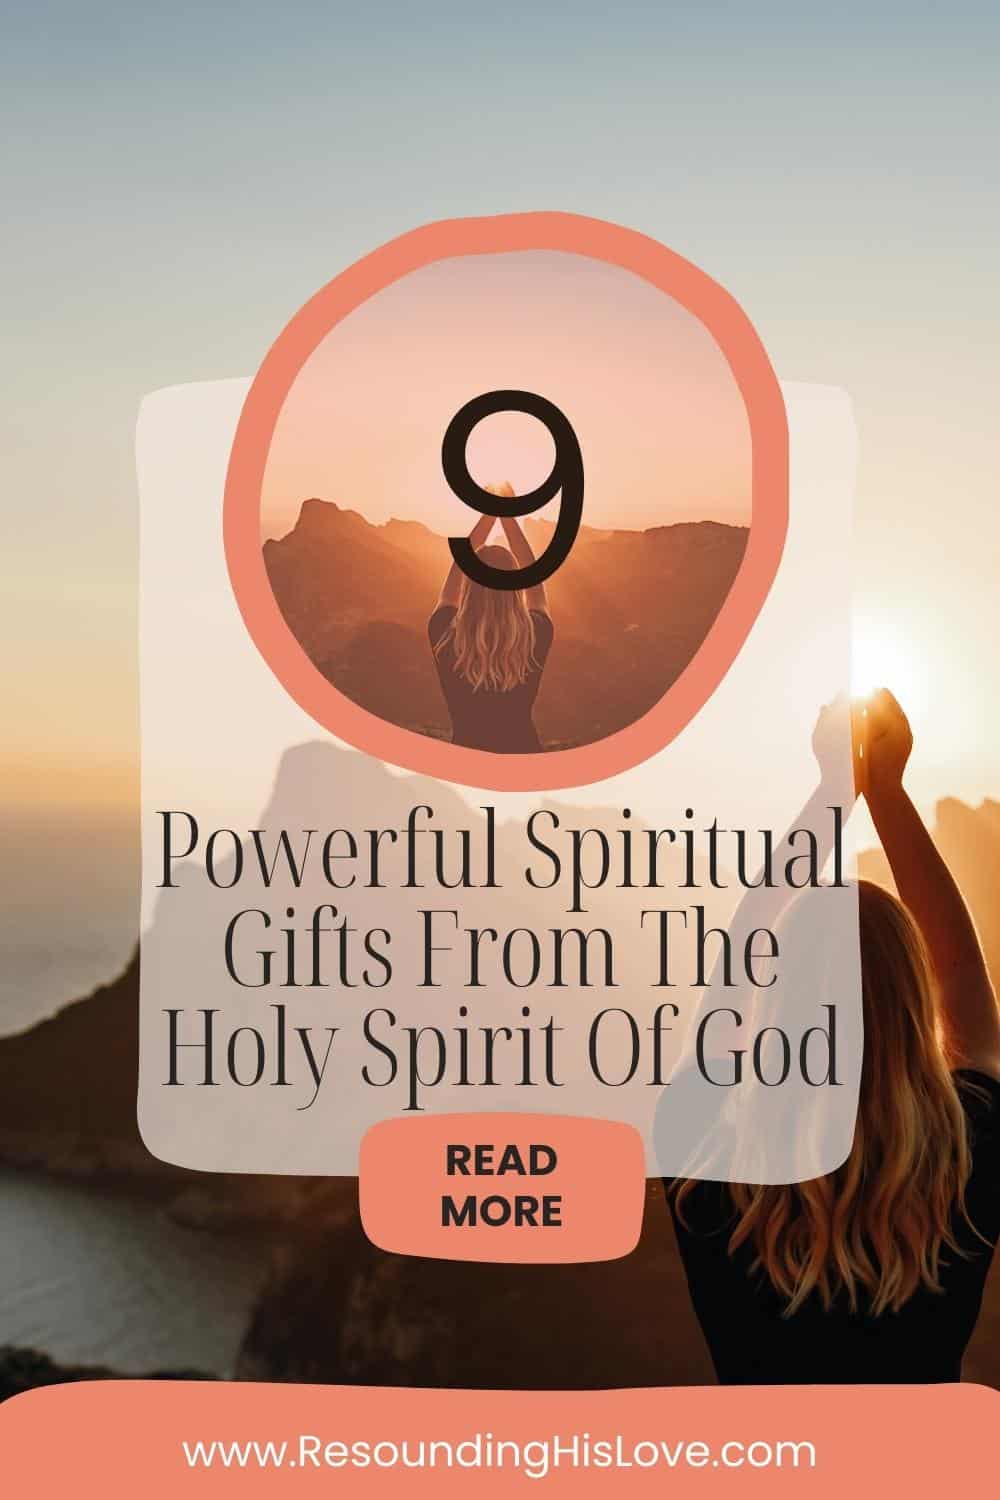 9 Powerful Spiritual Gifts From The Holy Spirit Of God